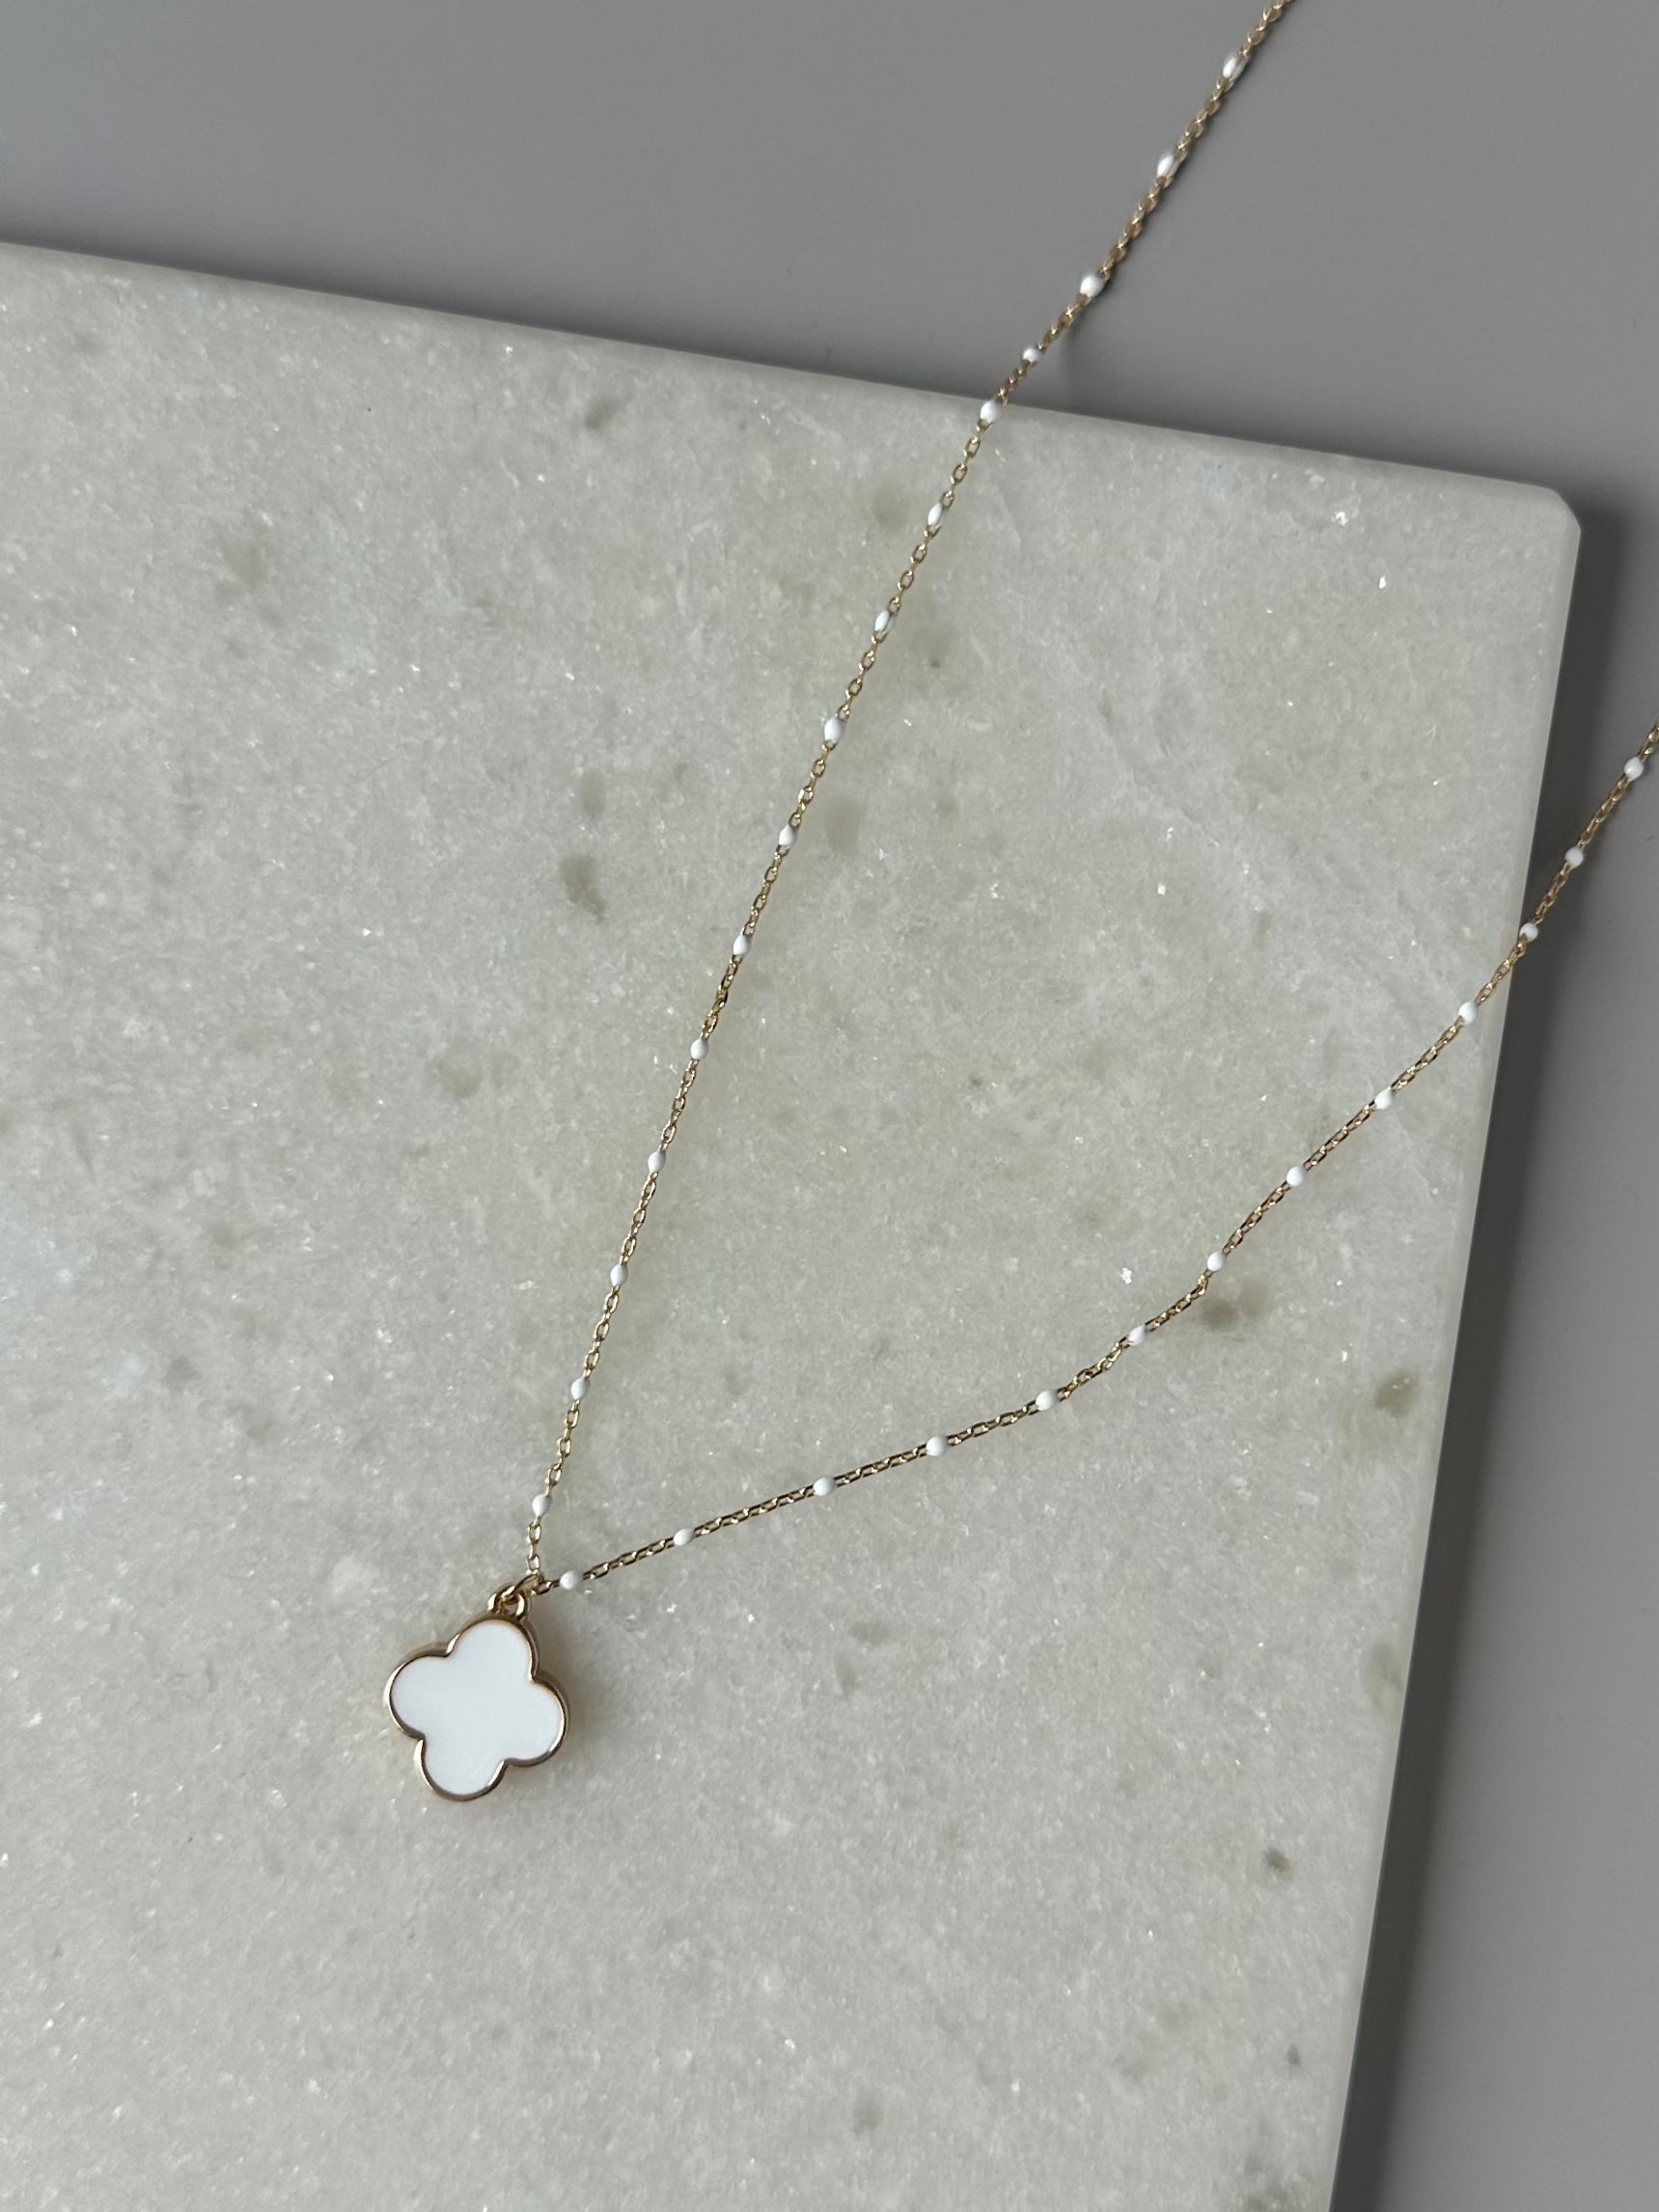 Clover Chain Detail Necklace- Gold/White